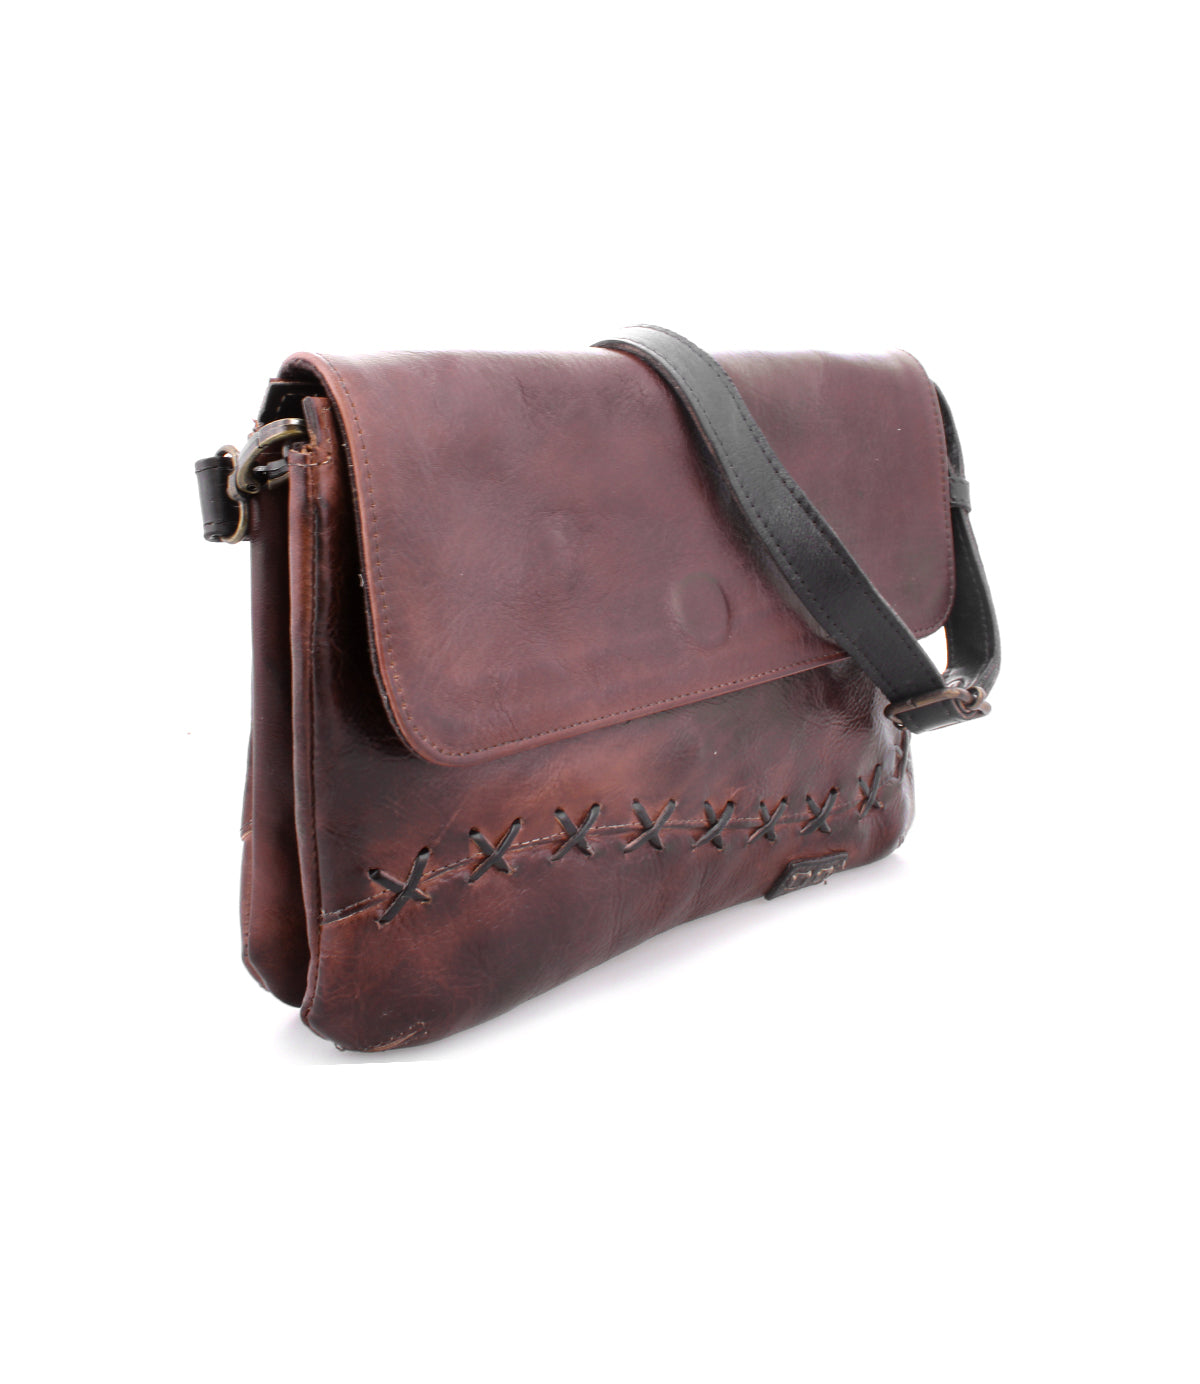 A Cleo crossbody bag from Bed Stu in brown leather with a zipper top closure.